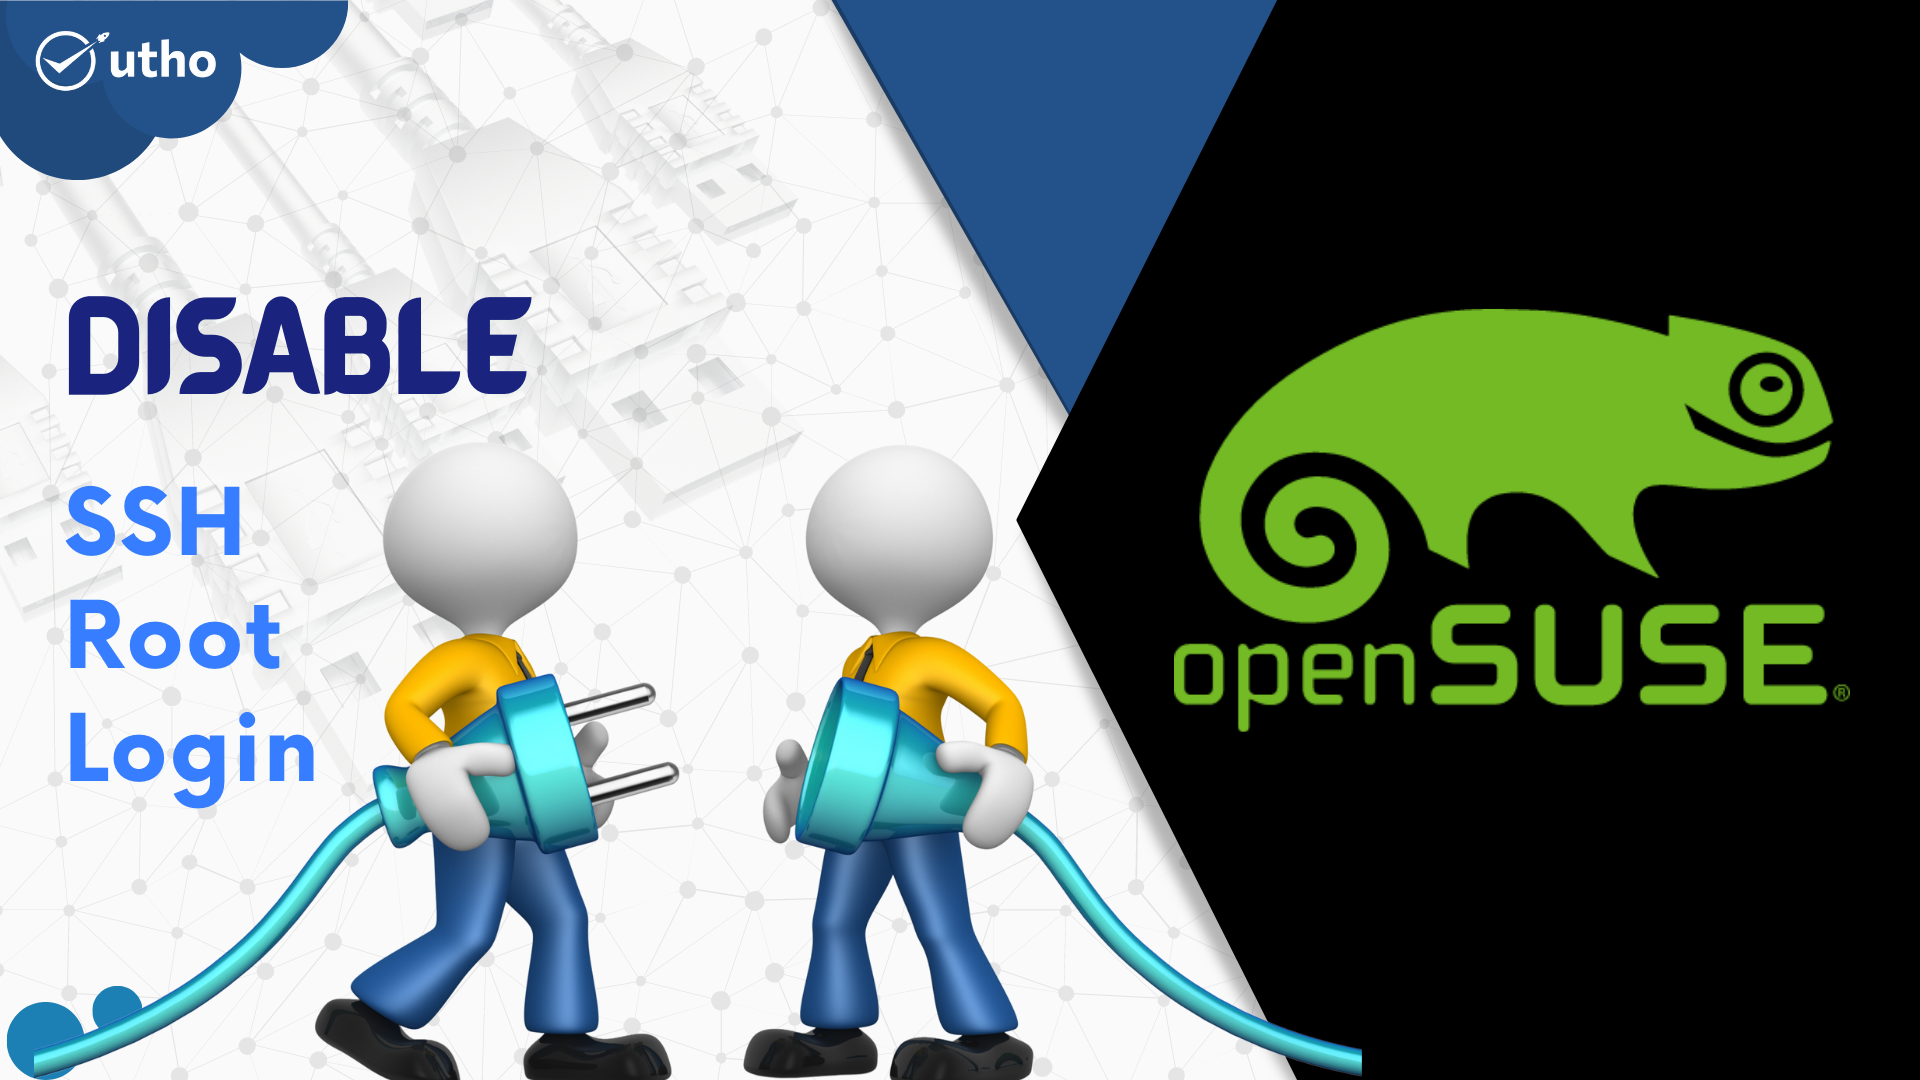 Disable the SSH root login in OpenSUSE